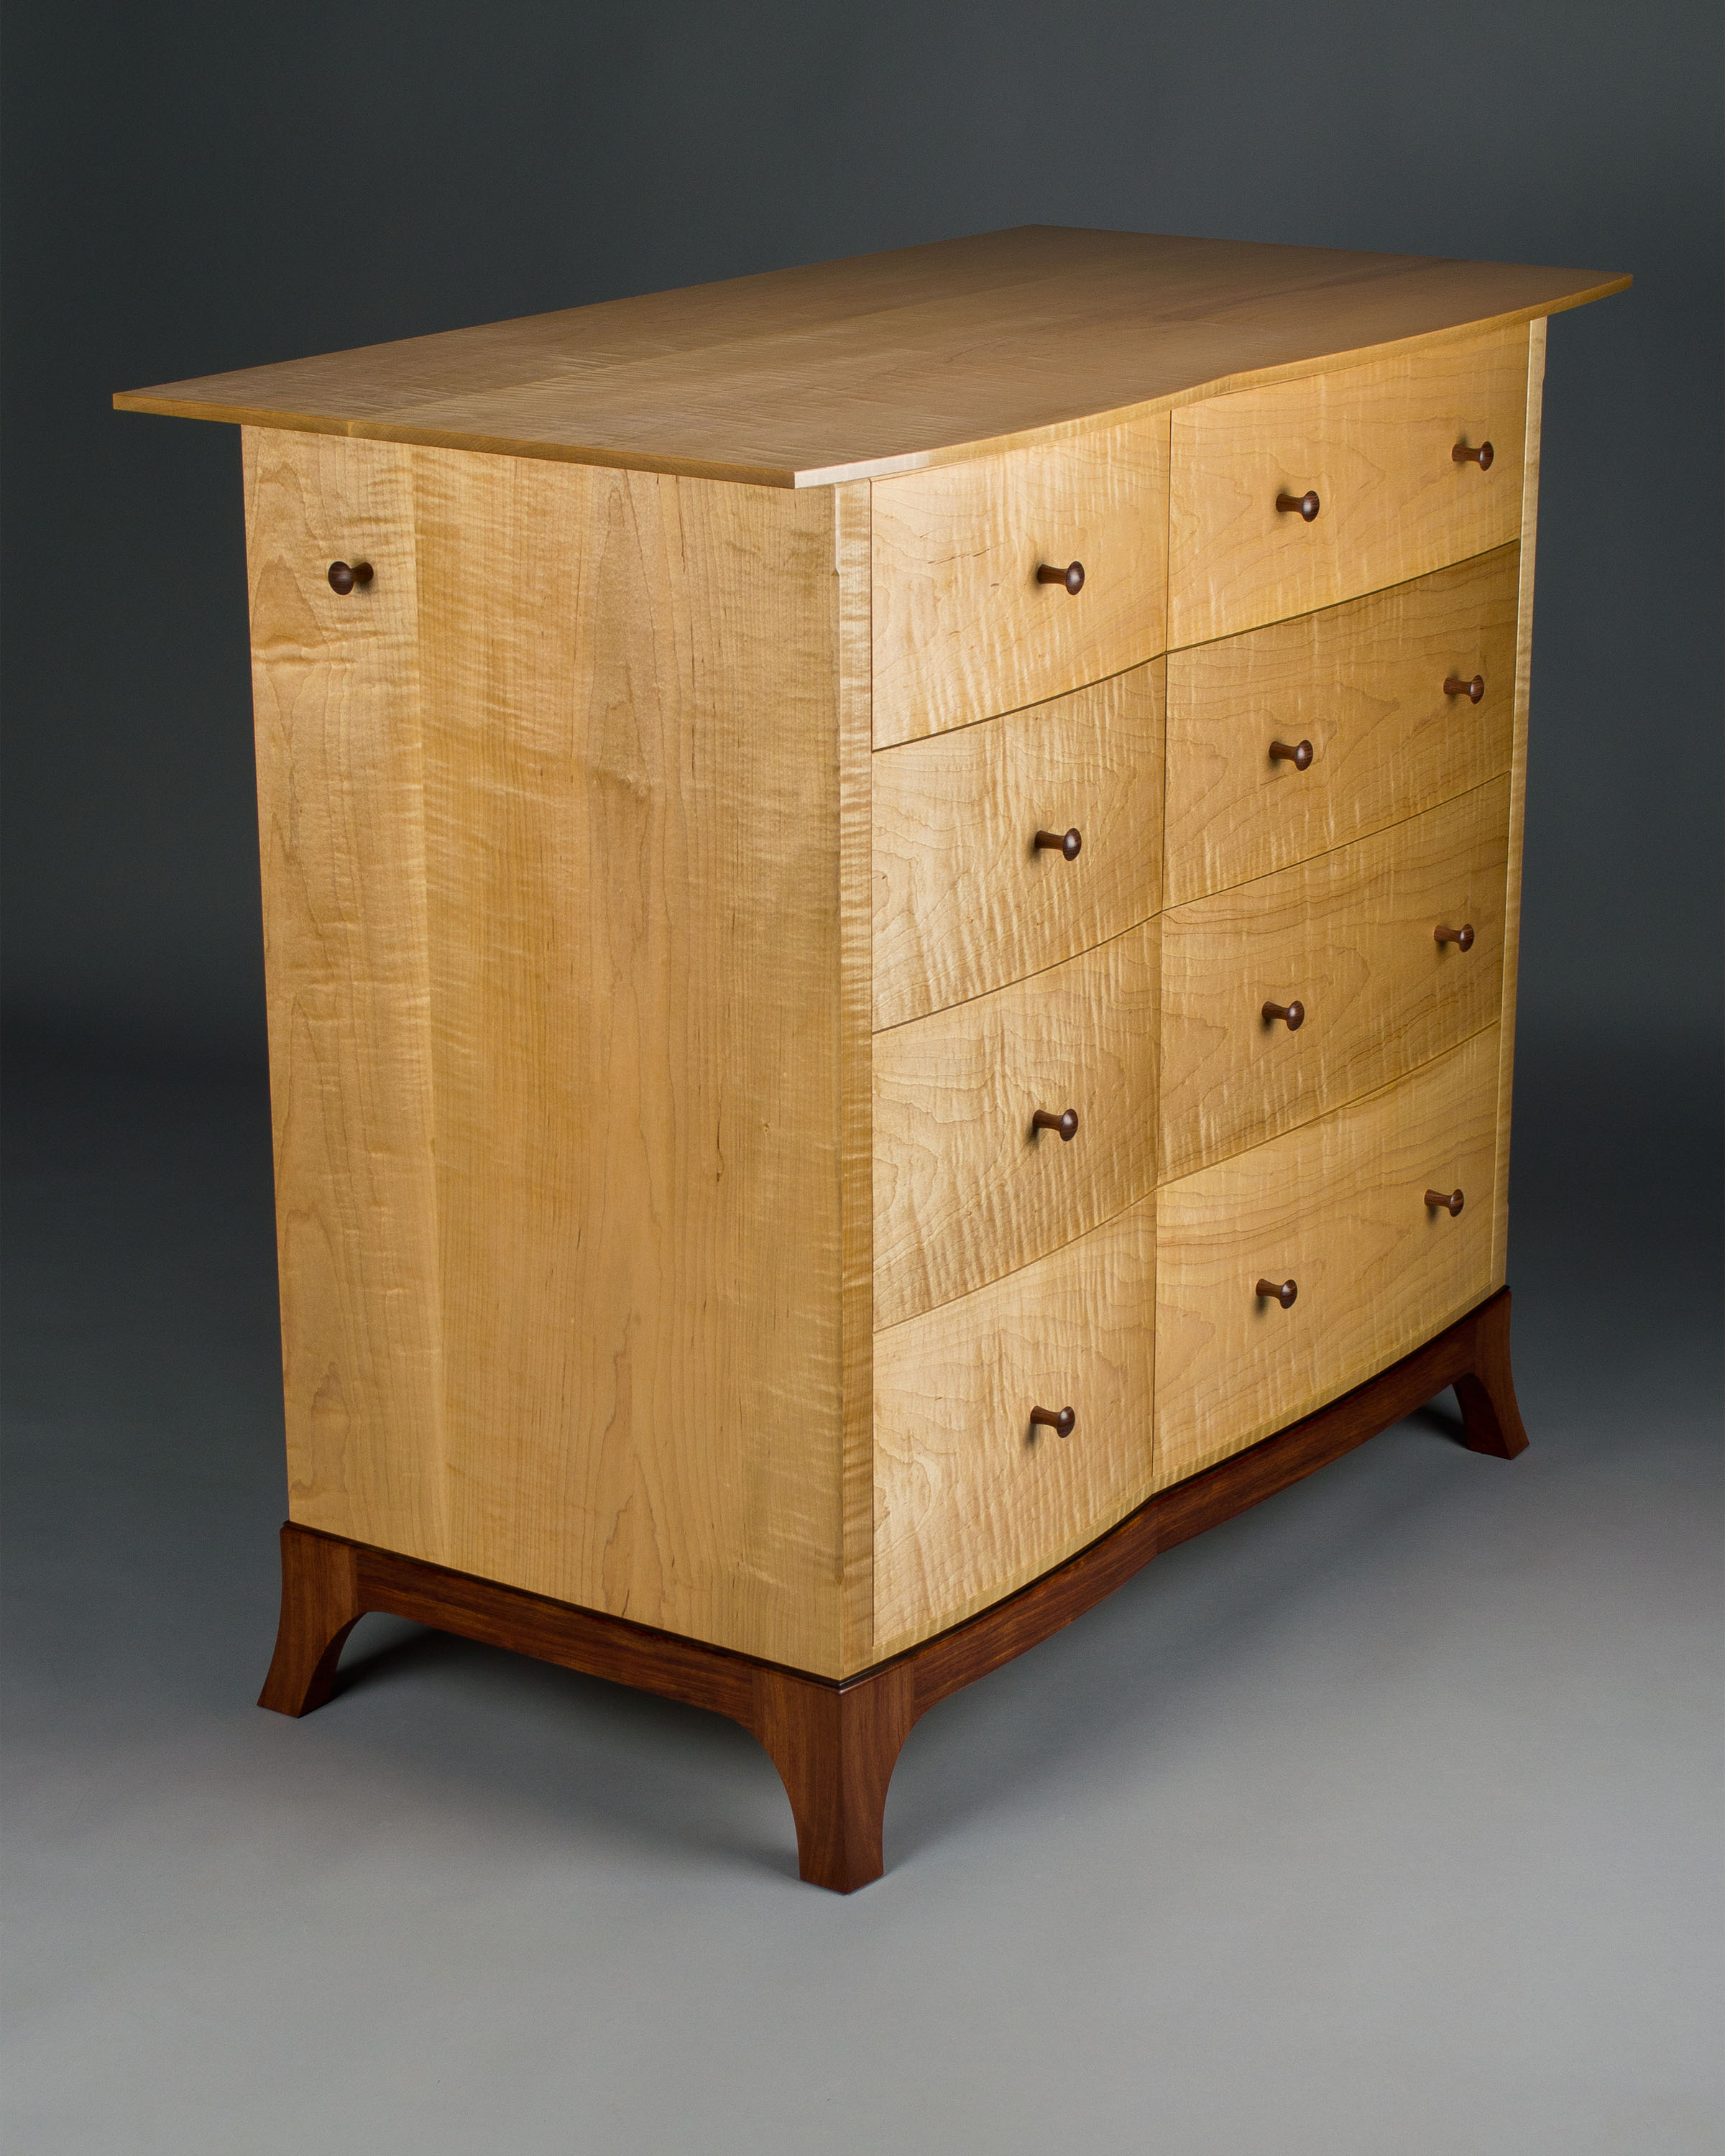 hand-crafted-details-on-chest-of-drawers.jpg